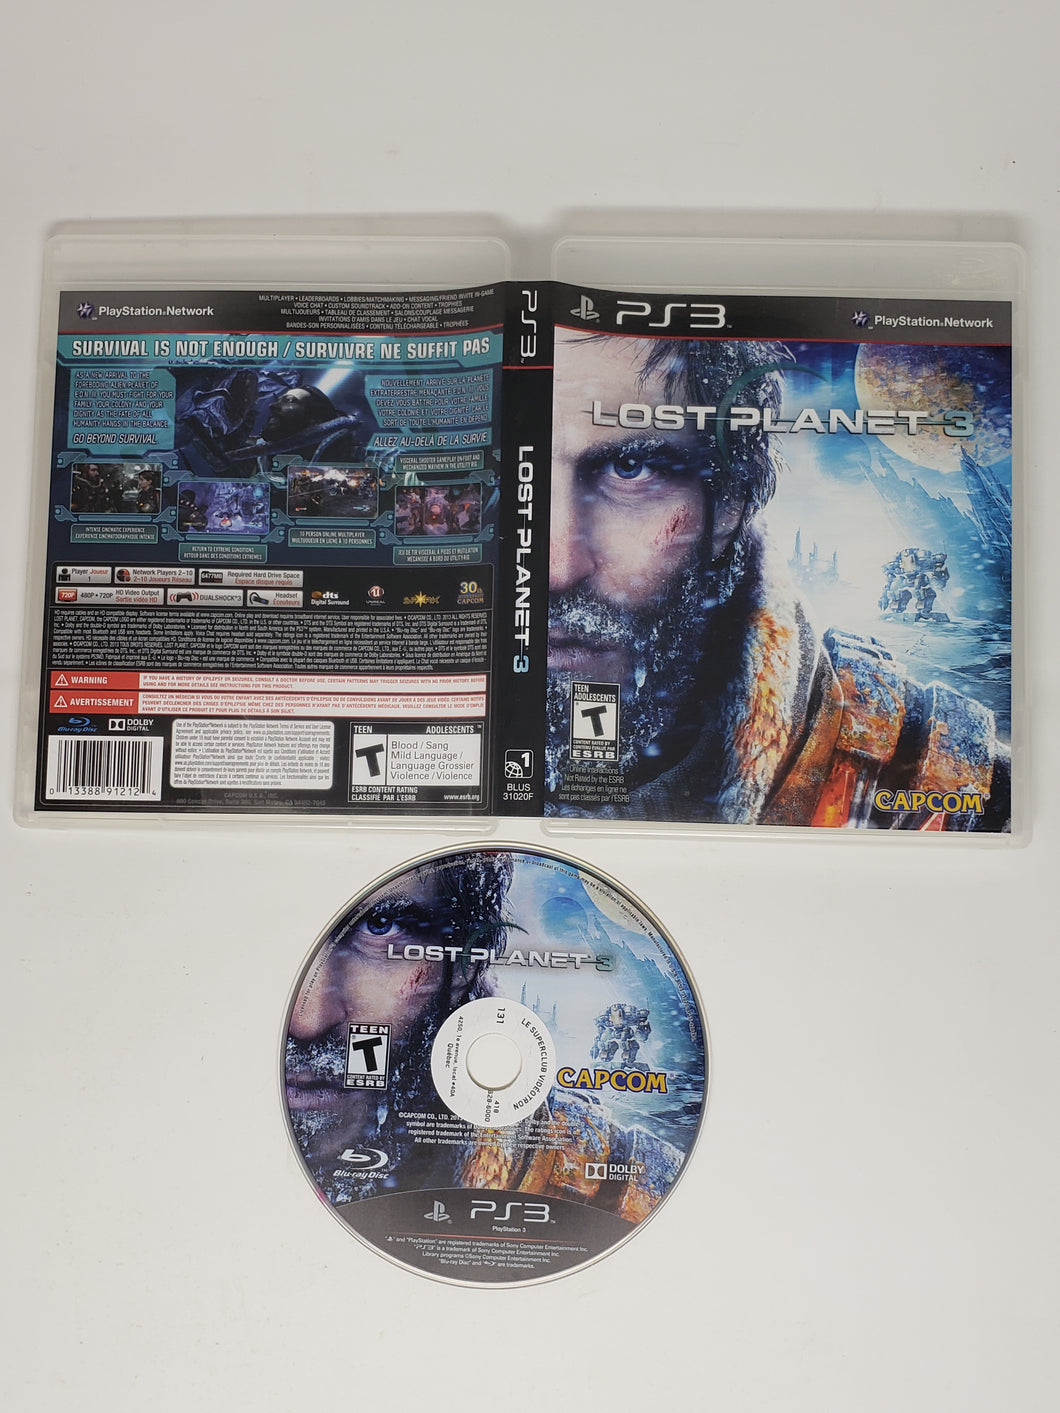 Lost Planet 3 - Sony Playstation 3 | PS3